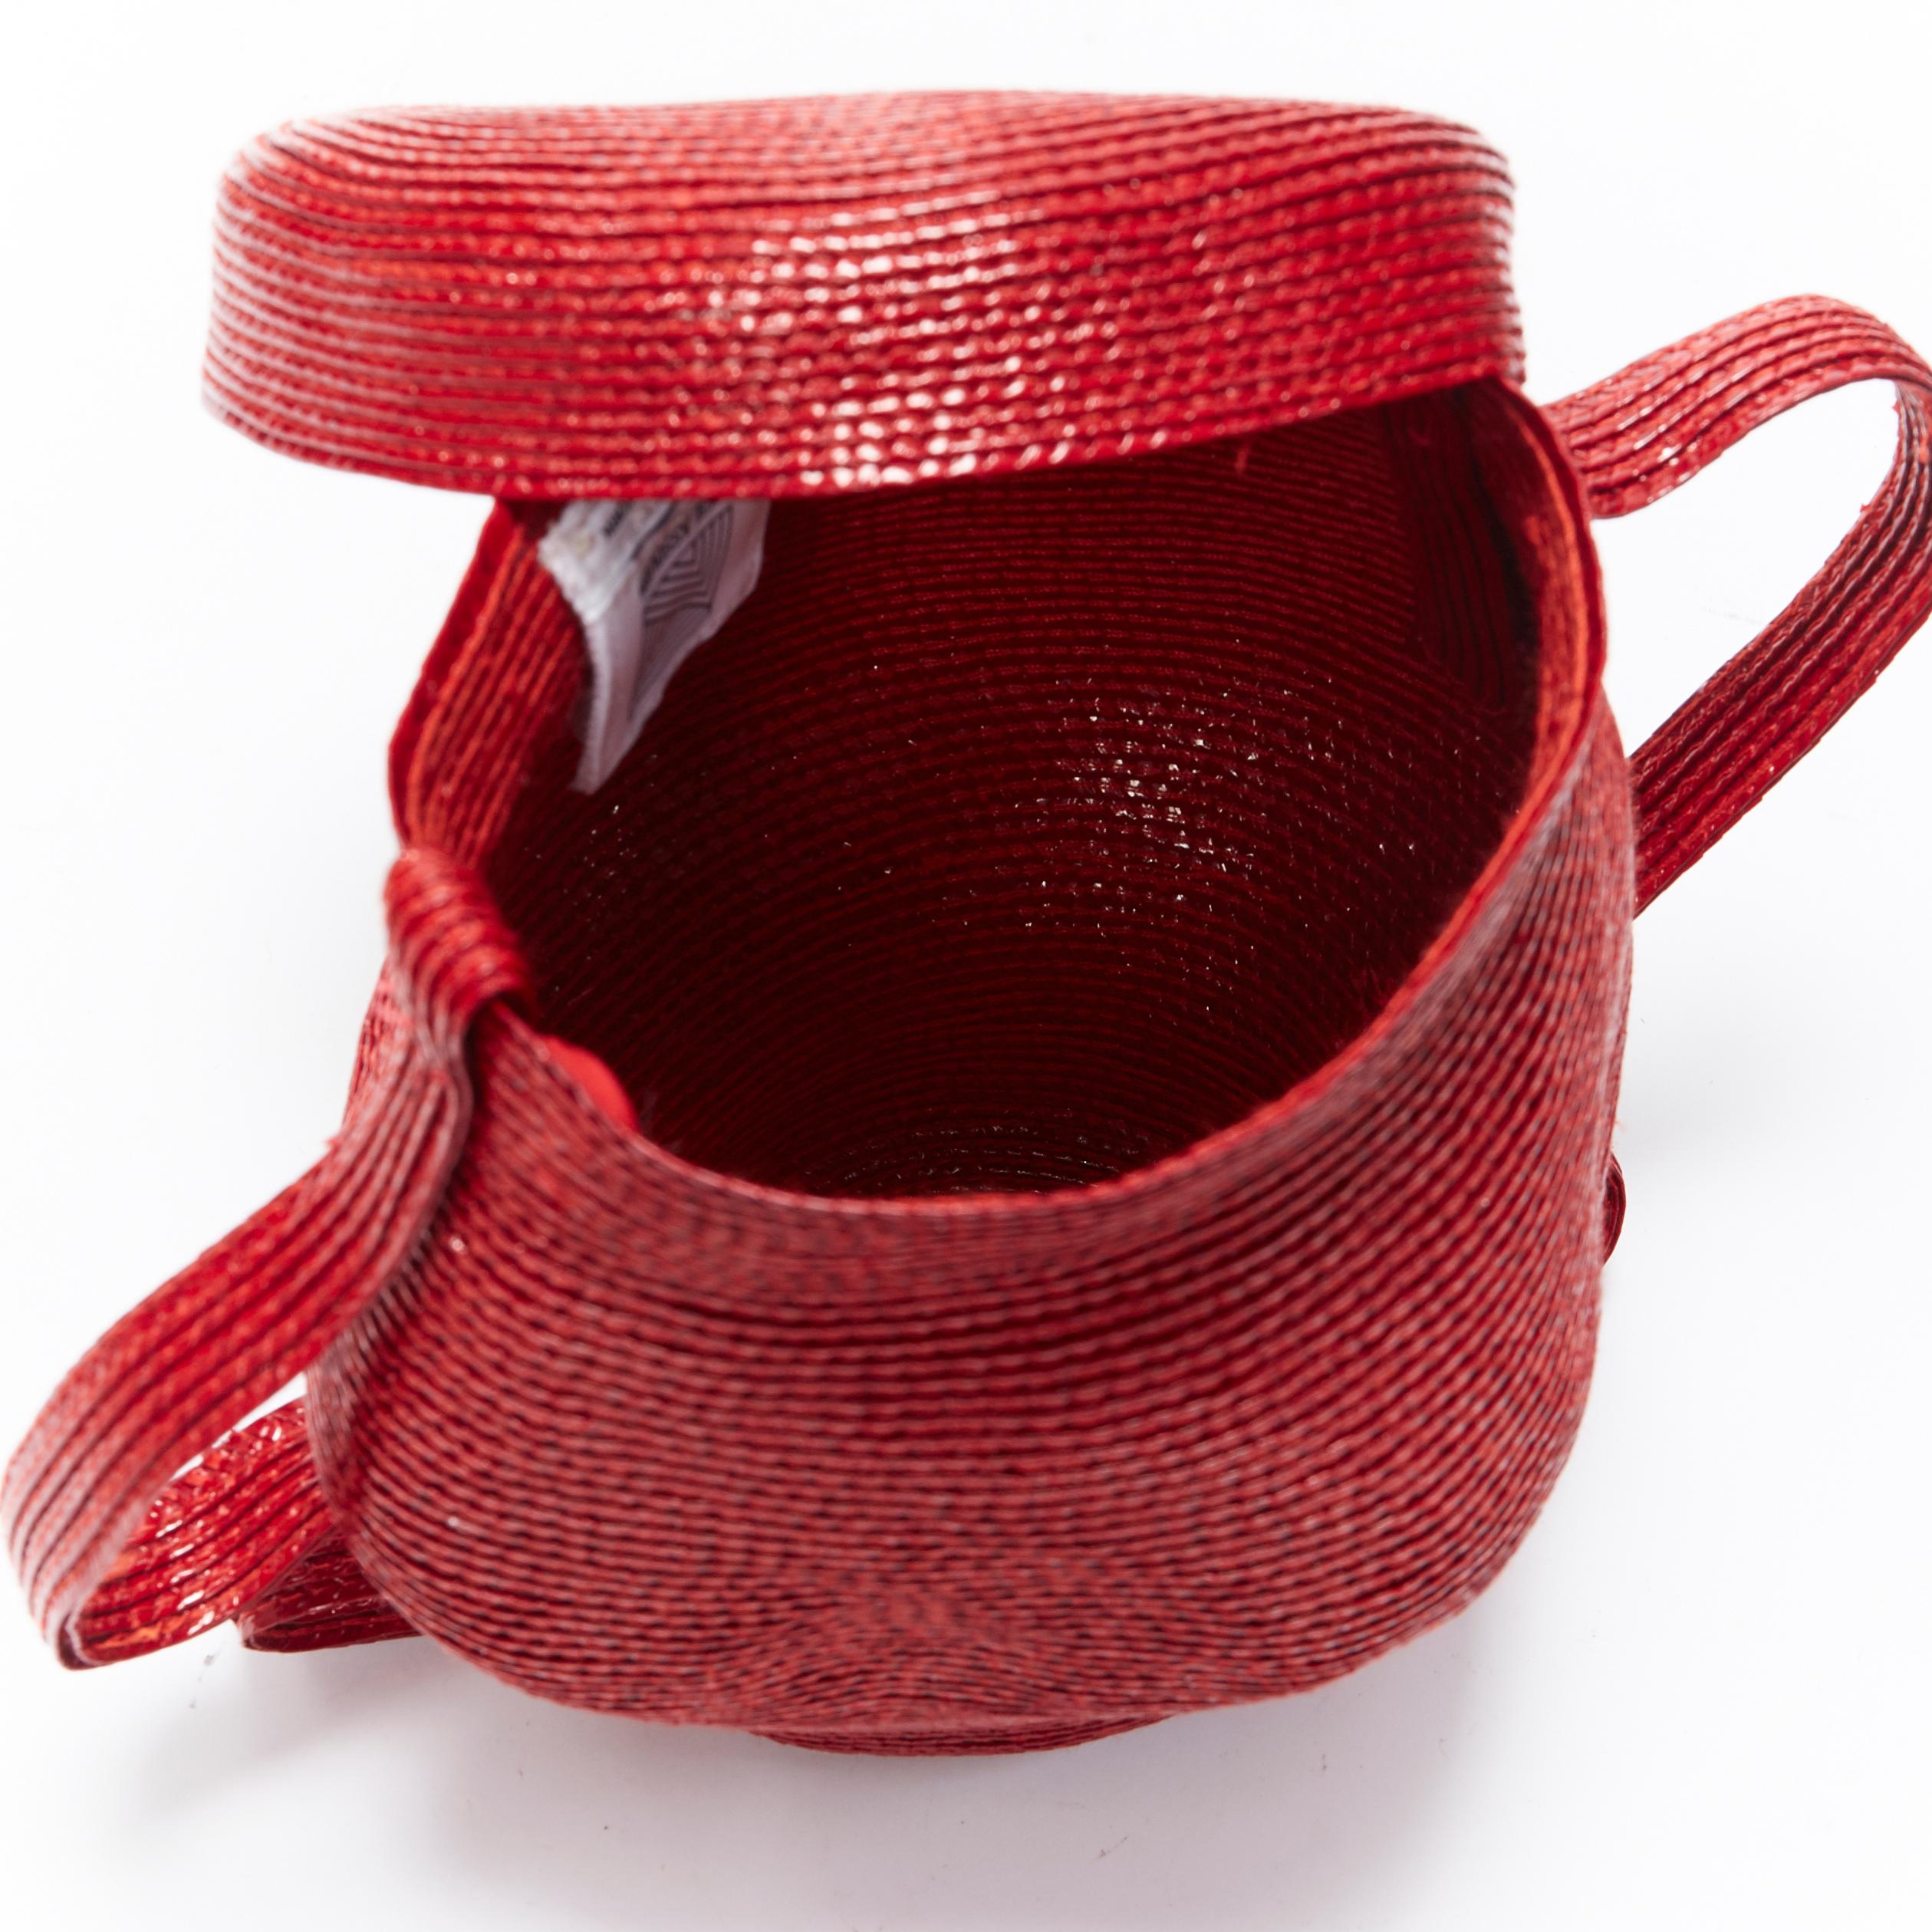 ROSIE ASSOULIN red lacquered woven raffia top lid Jug small novelty clutch bag 2